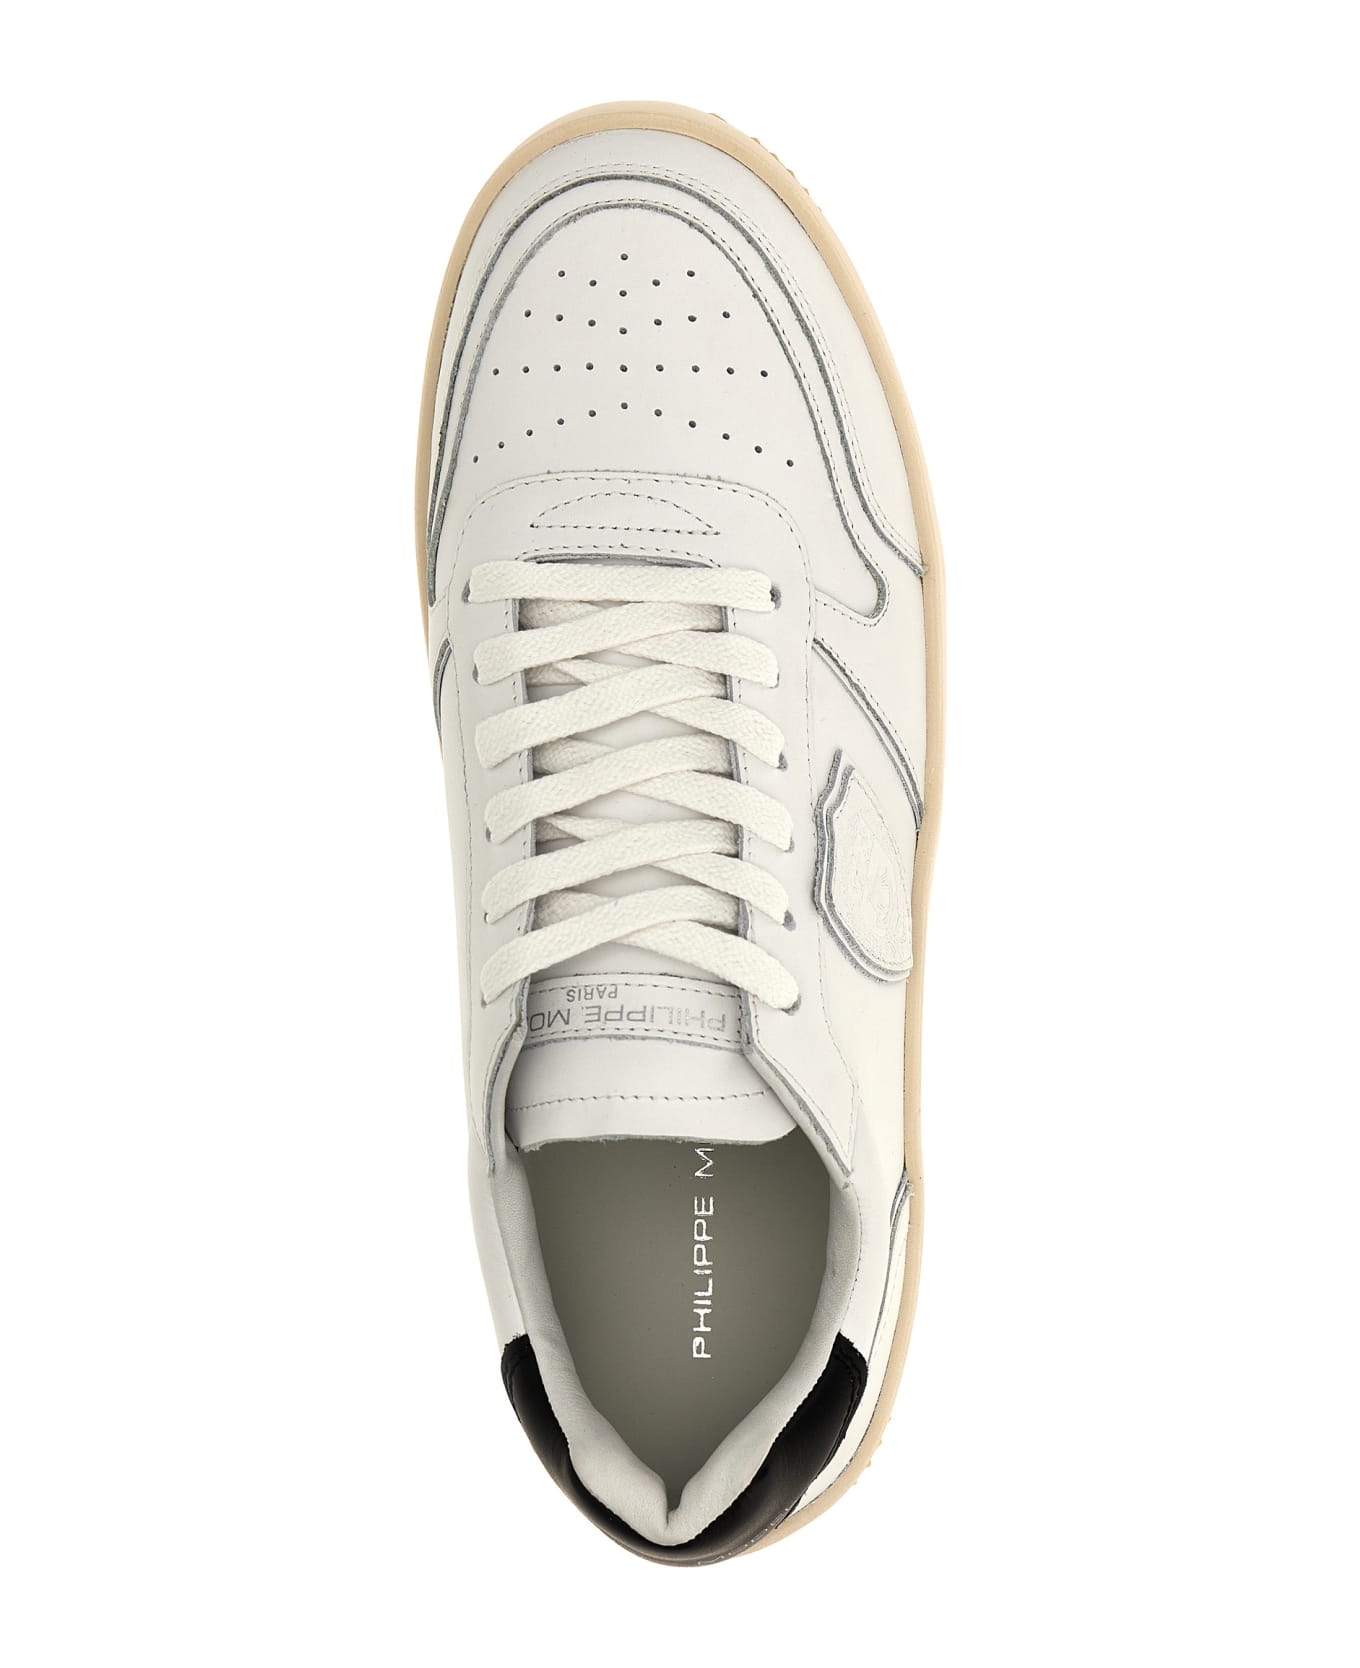 Philippe Model 'nice Low' Sneakers - White/Black